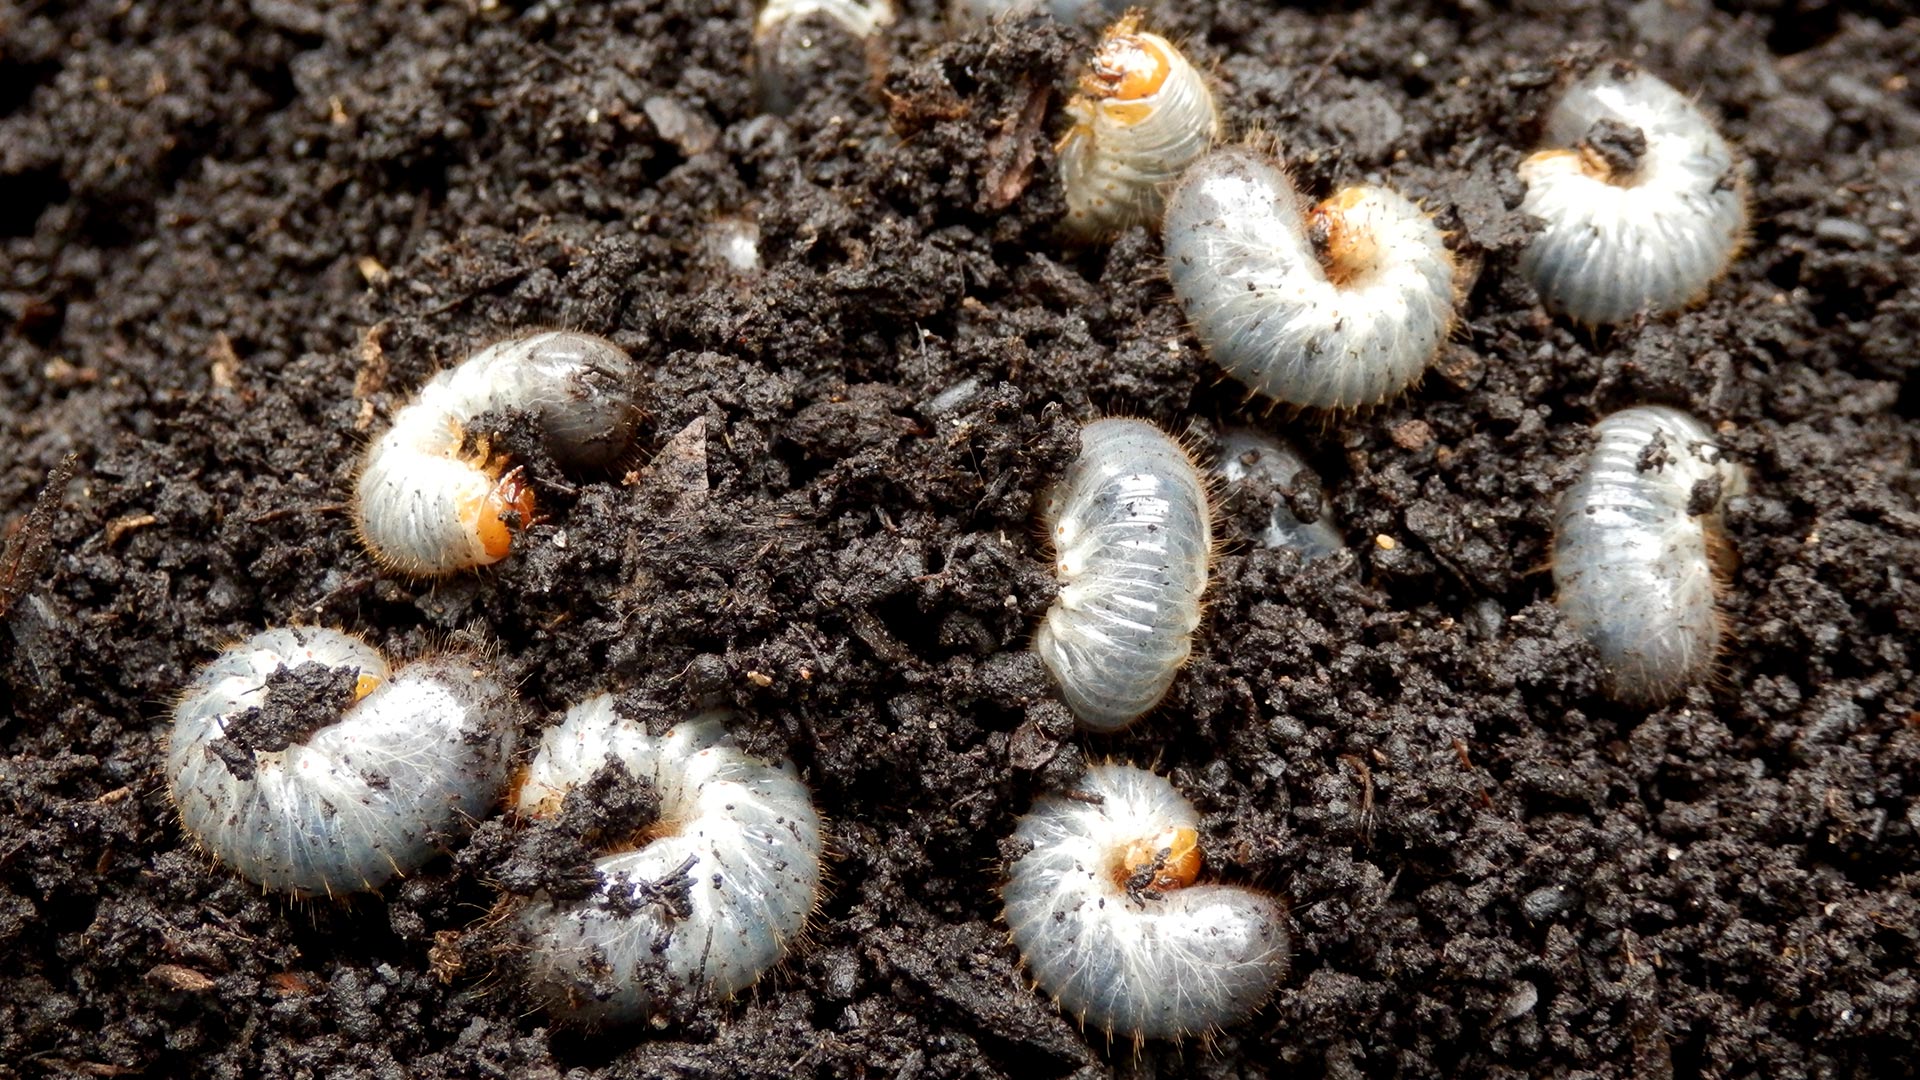 Several grubs uncovered in the dirt on a property in Westfield, IN.